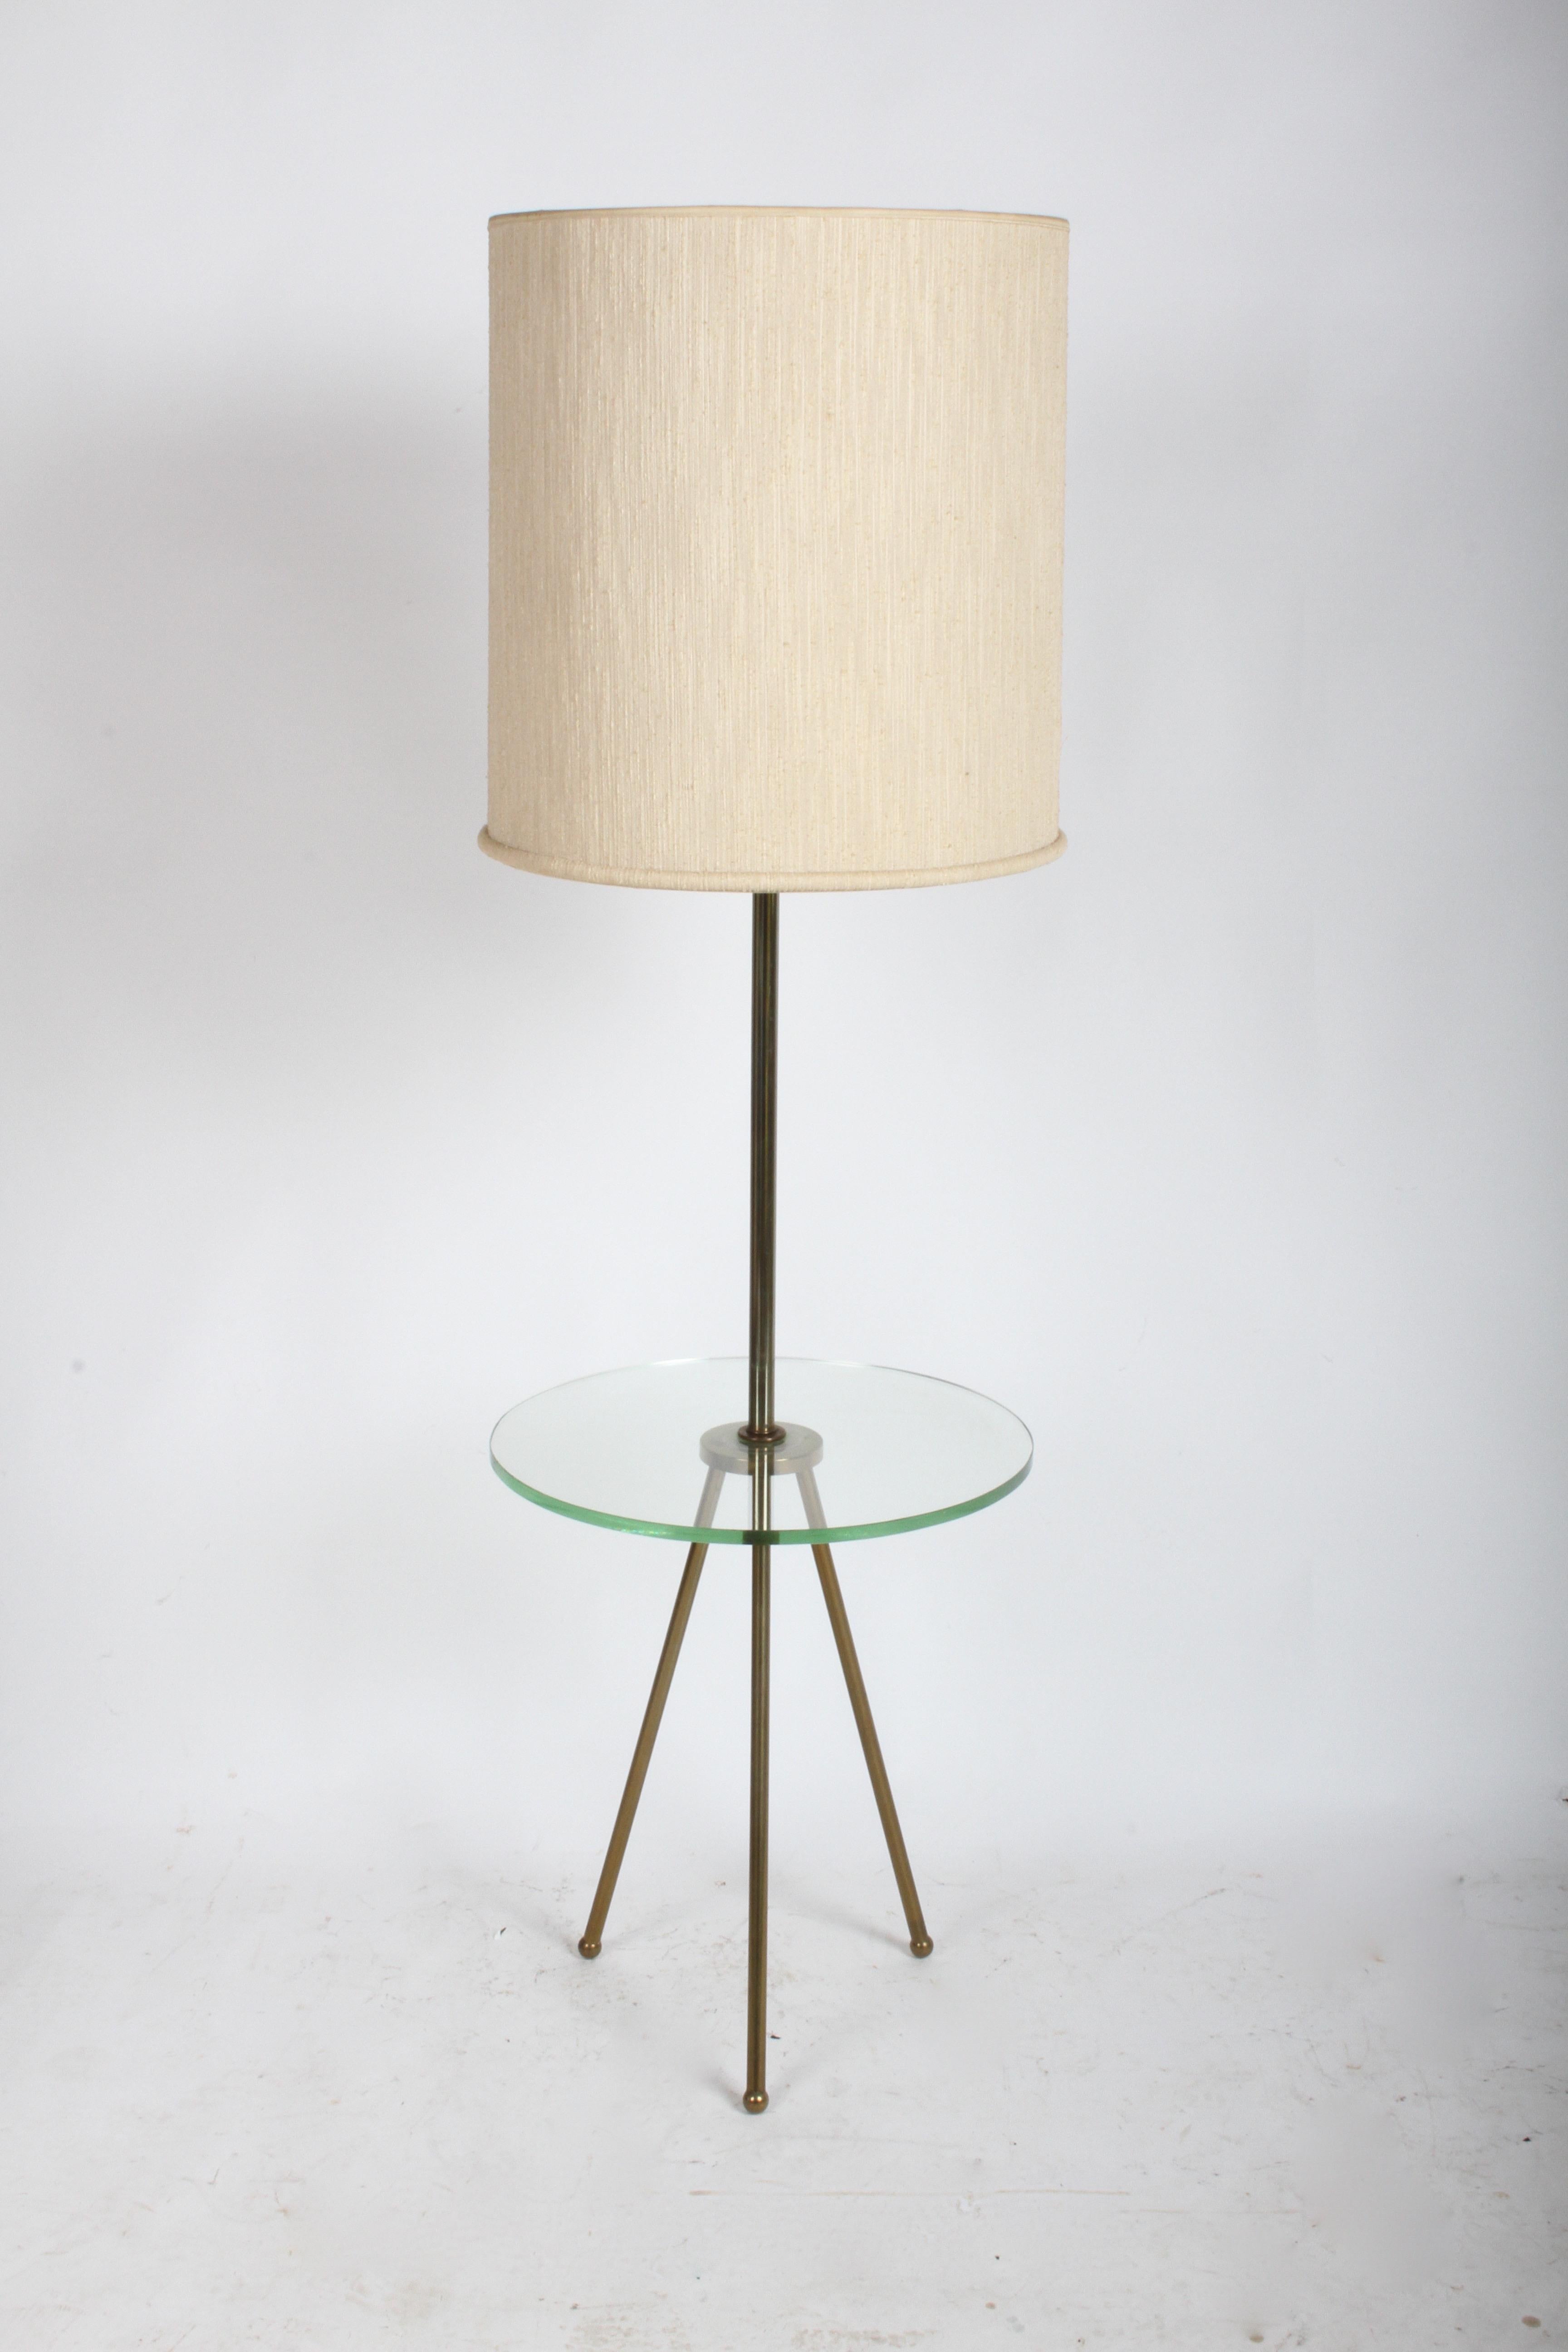 Mid-Century Modern floor lamp having brass tripod legs with round glass shelf, in the style of Fontana Arte. Unknown designer, but also has the look of Italian modern designers. Shade not included, shade specs shown are 19